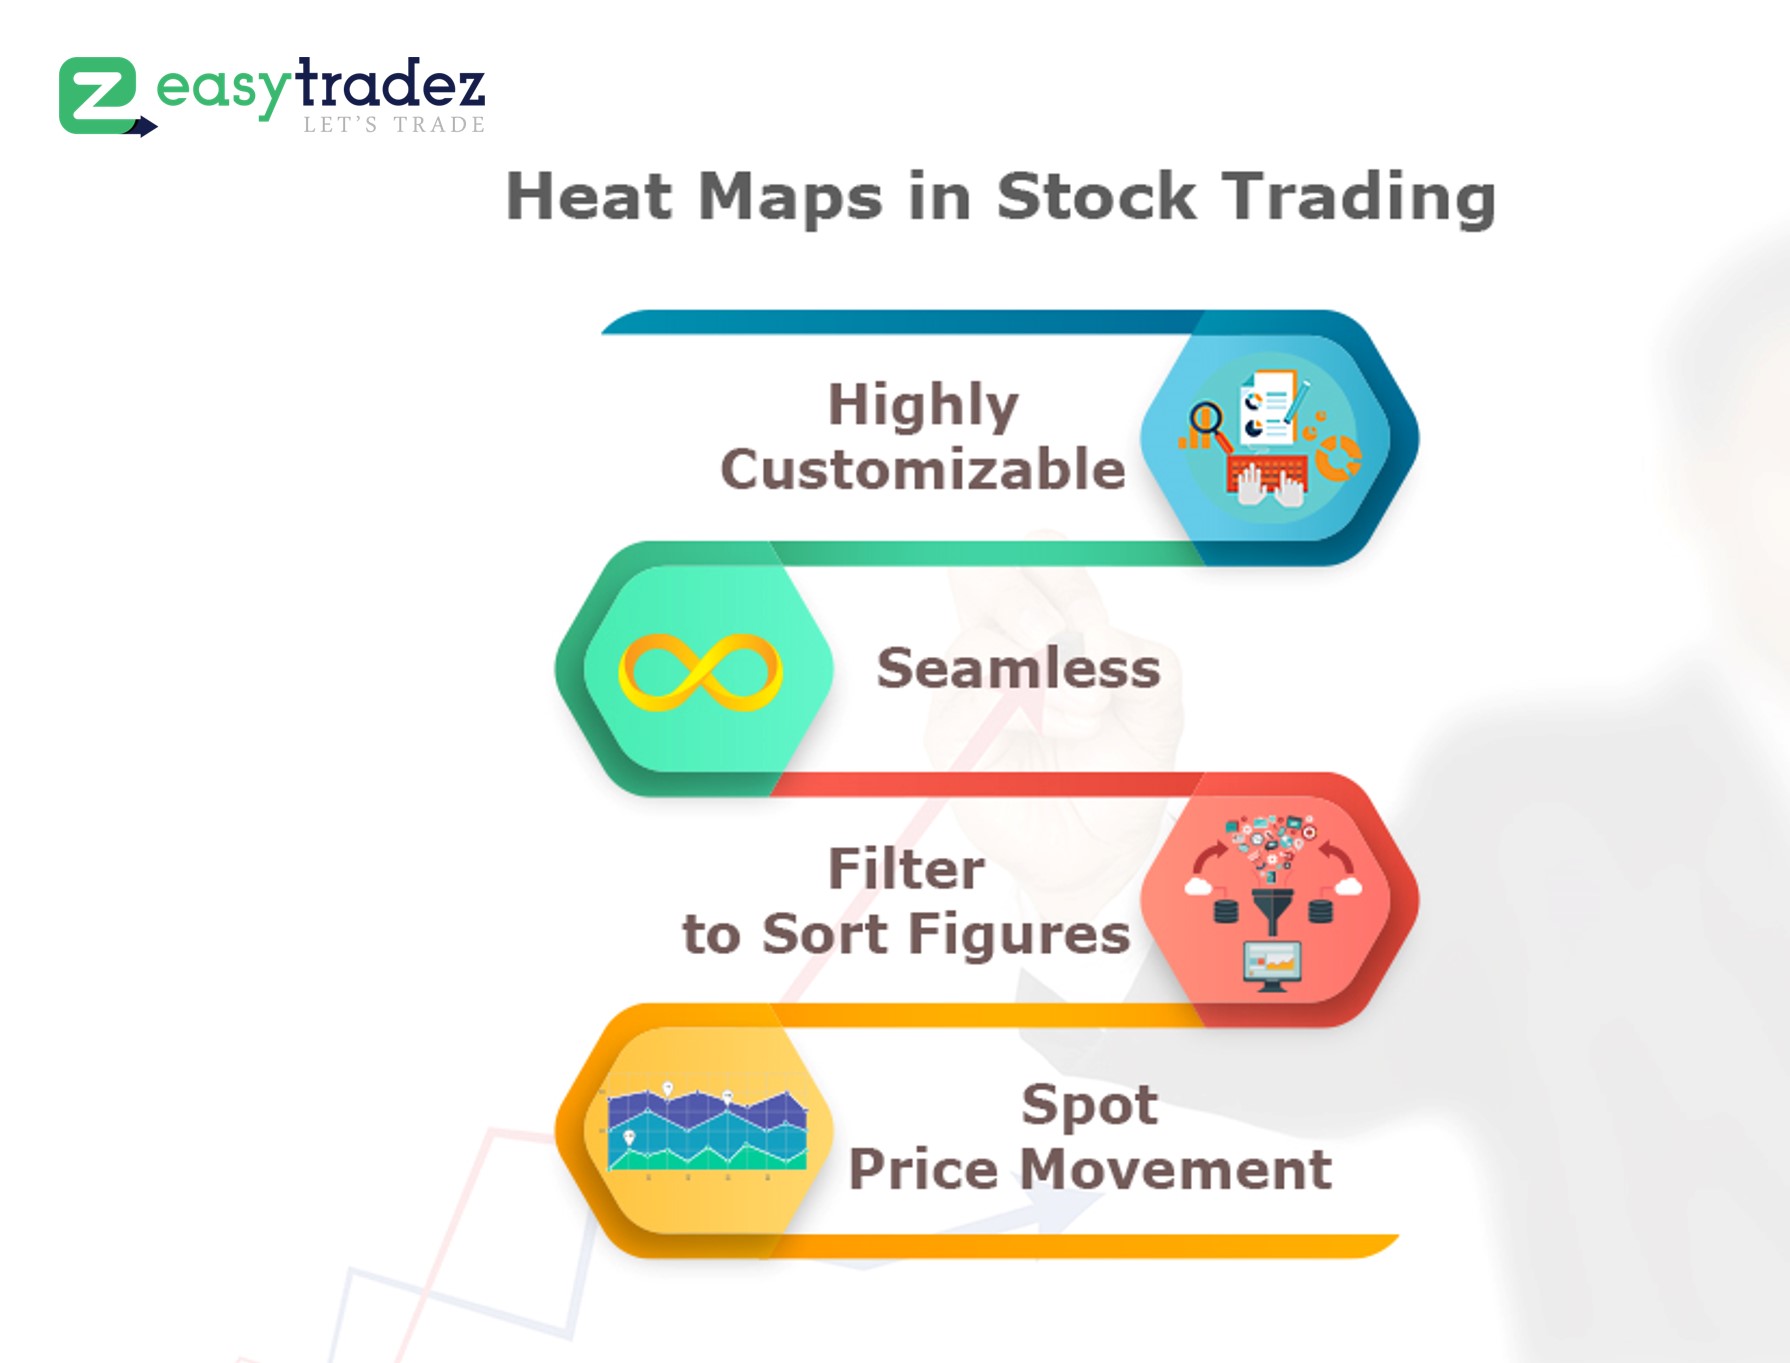 How to Buy or Sell using Heat Maps